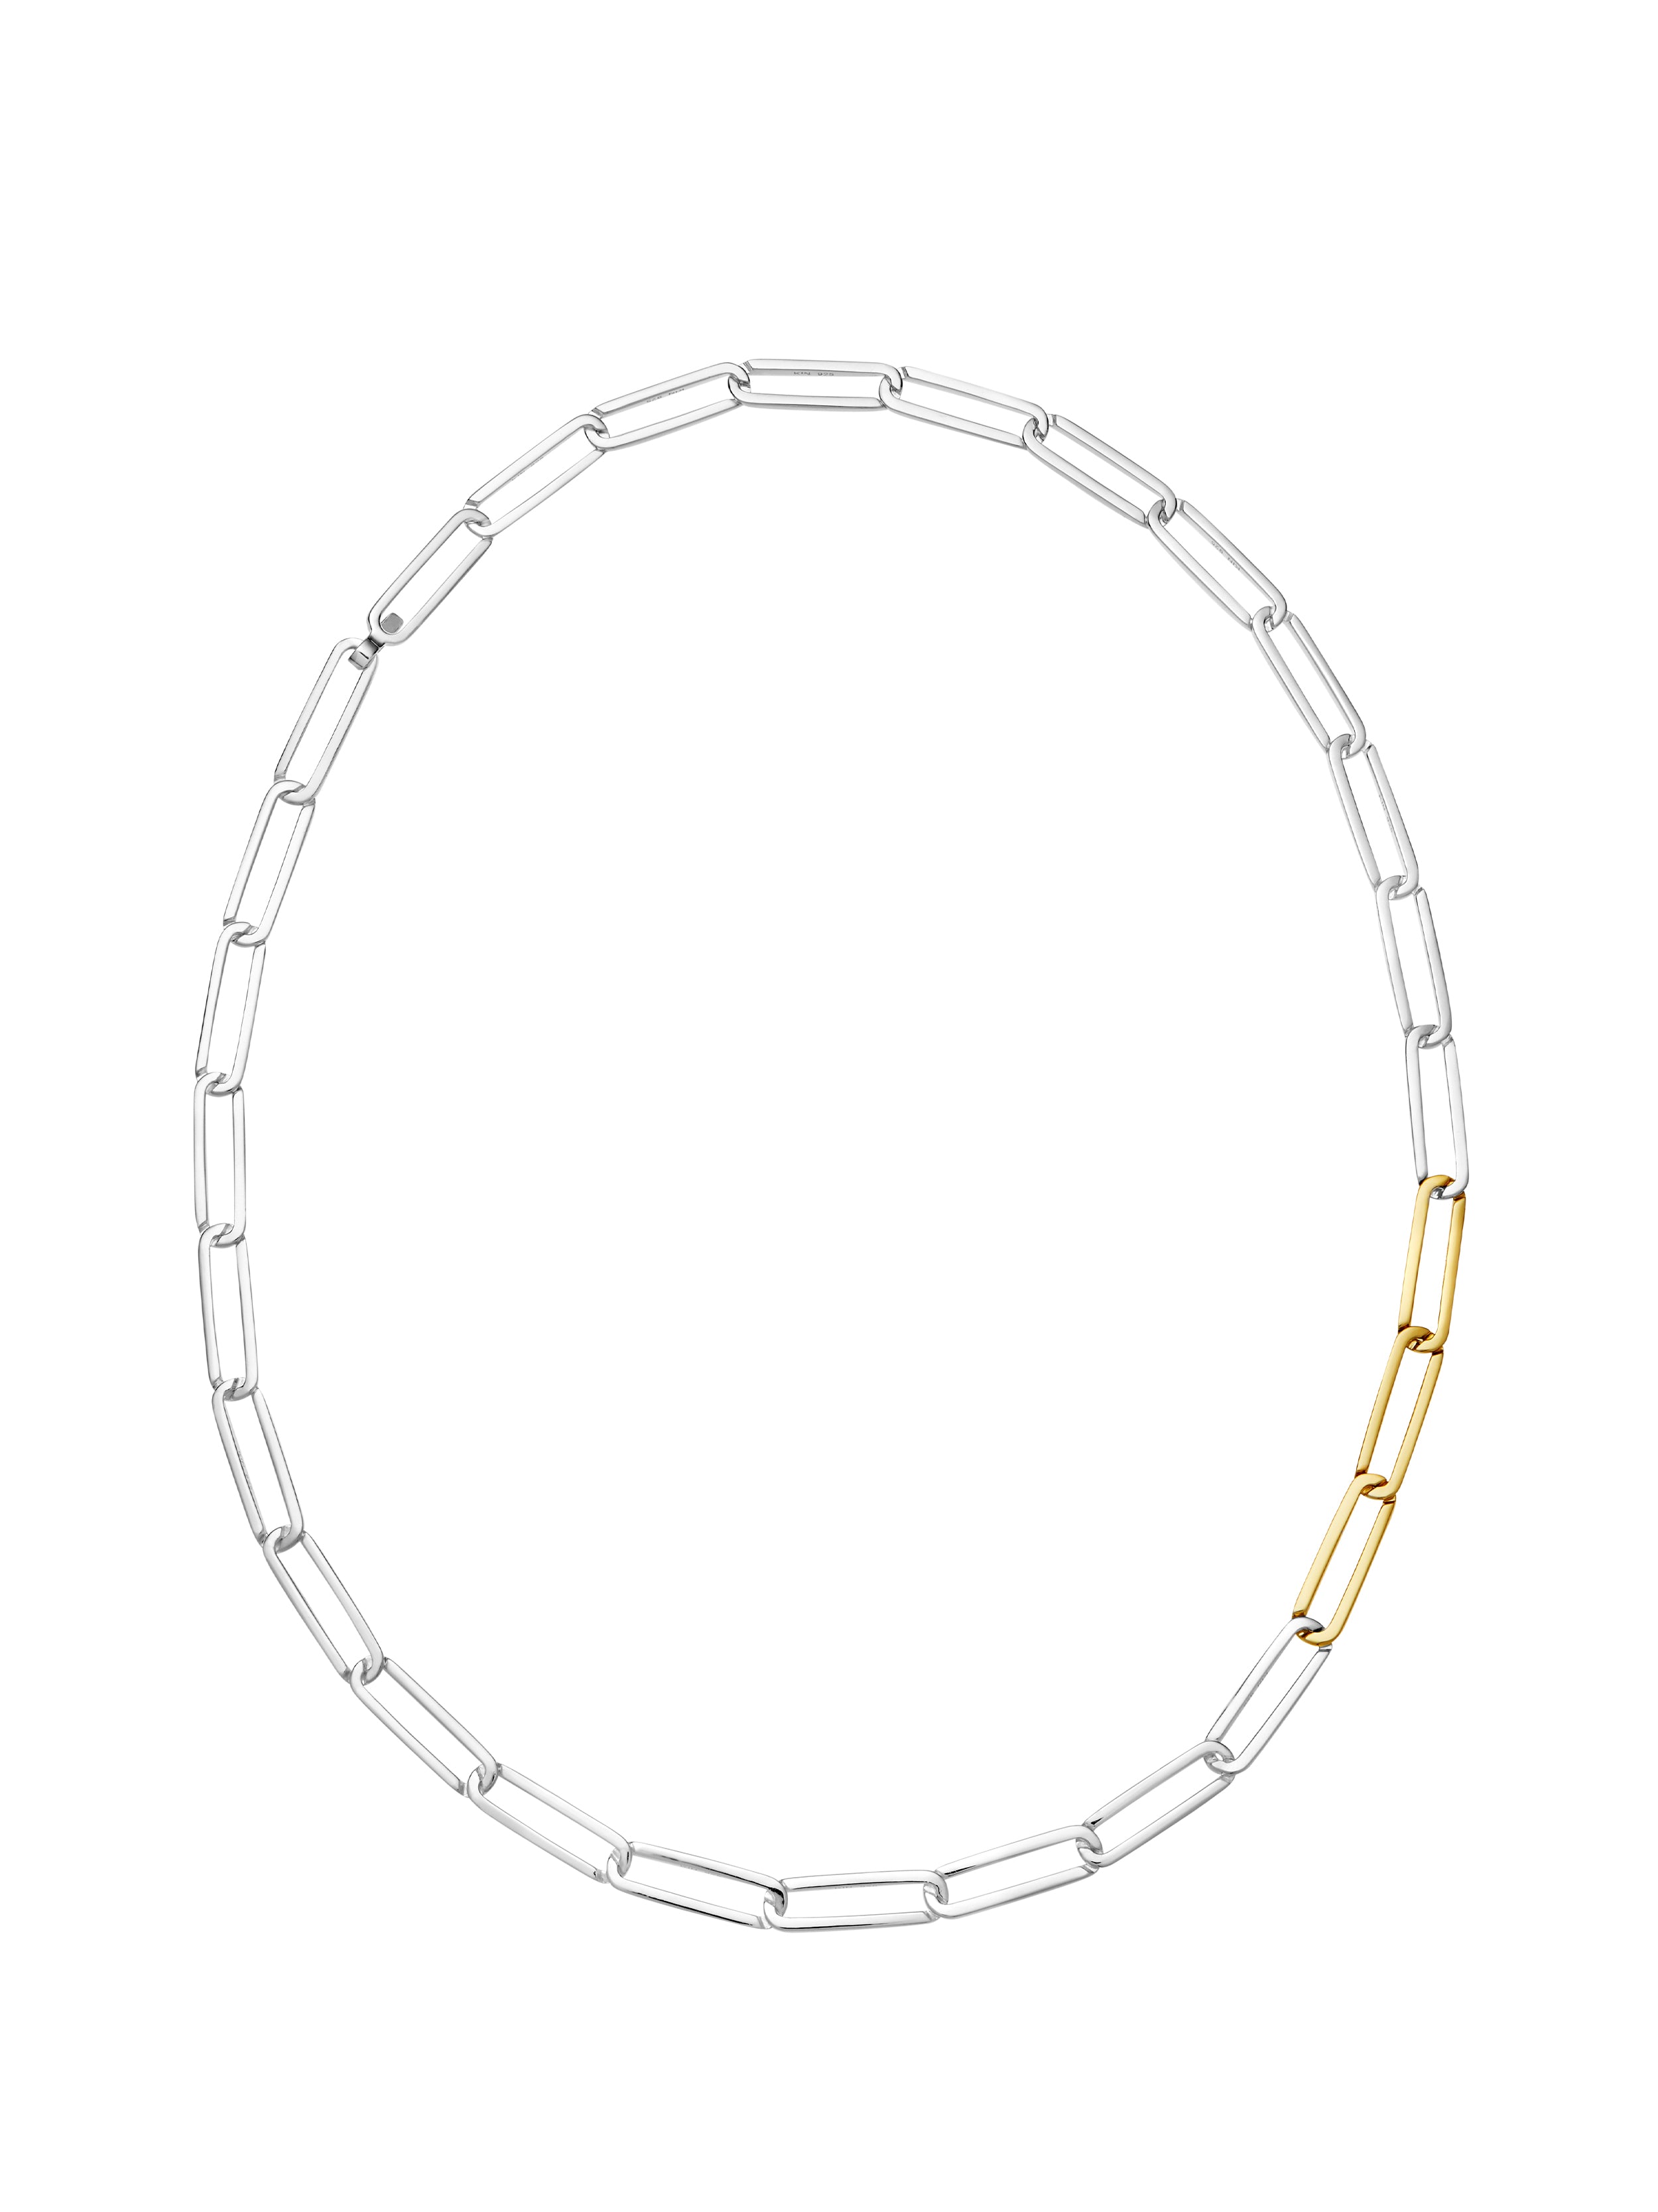 KINRADEN APS EXHALING HER SMALL Necklace - sterling silver, 3 gold links Necklaces